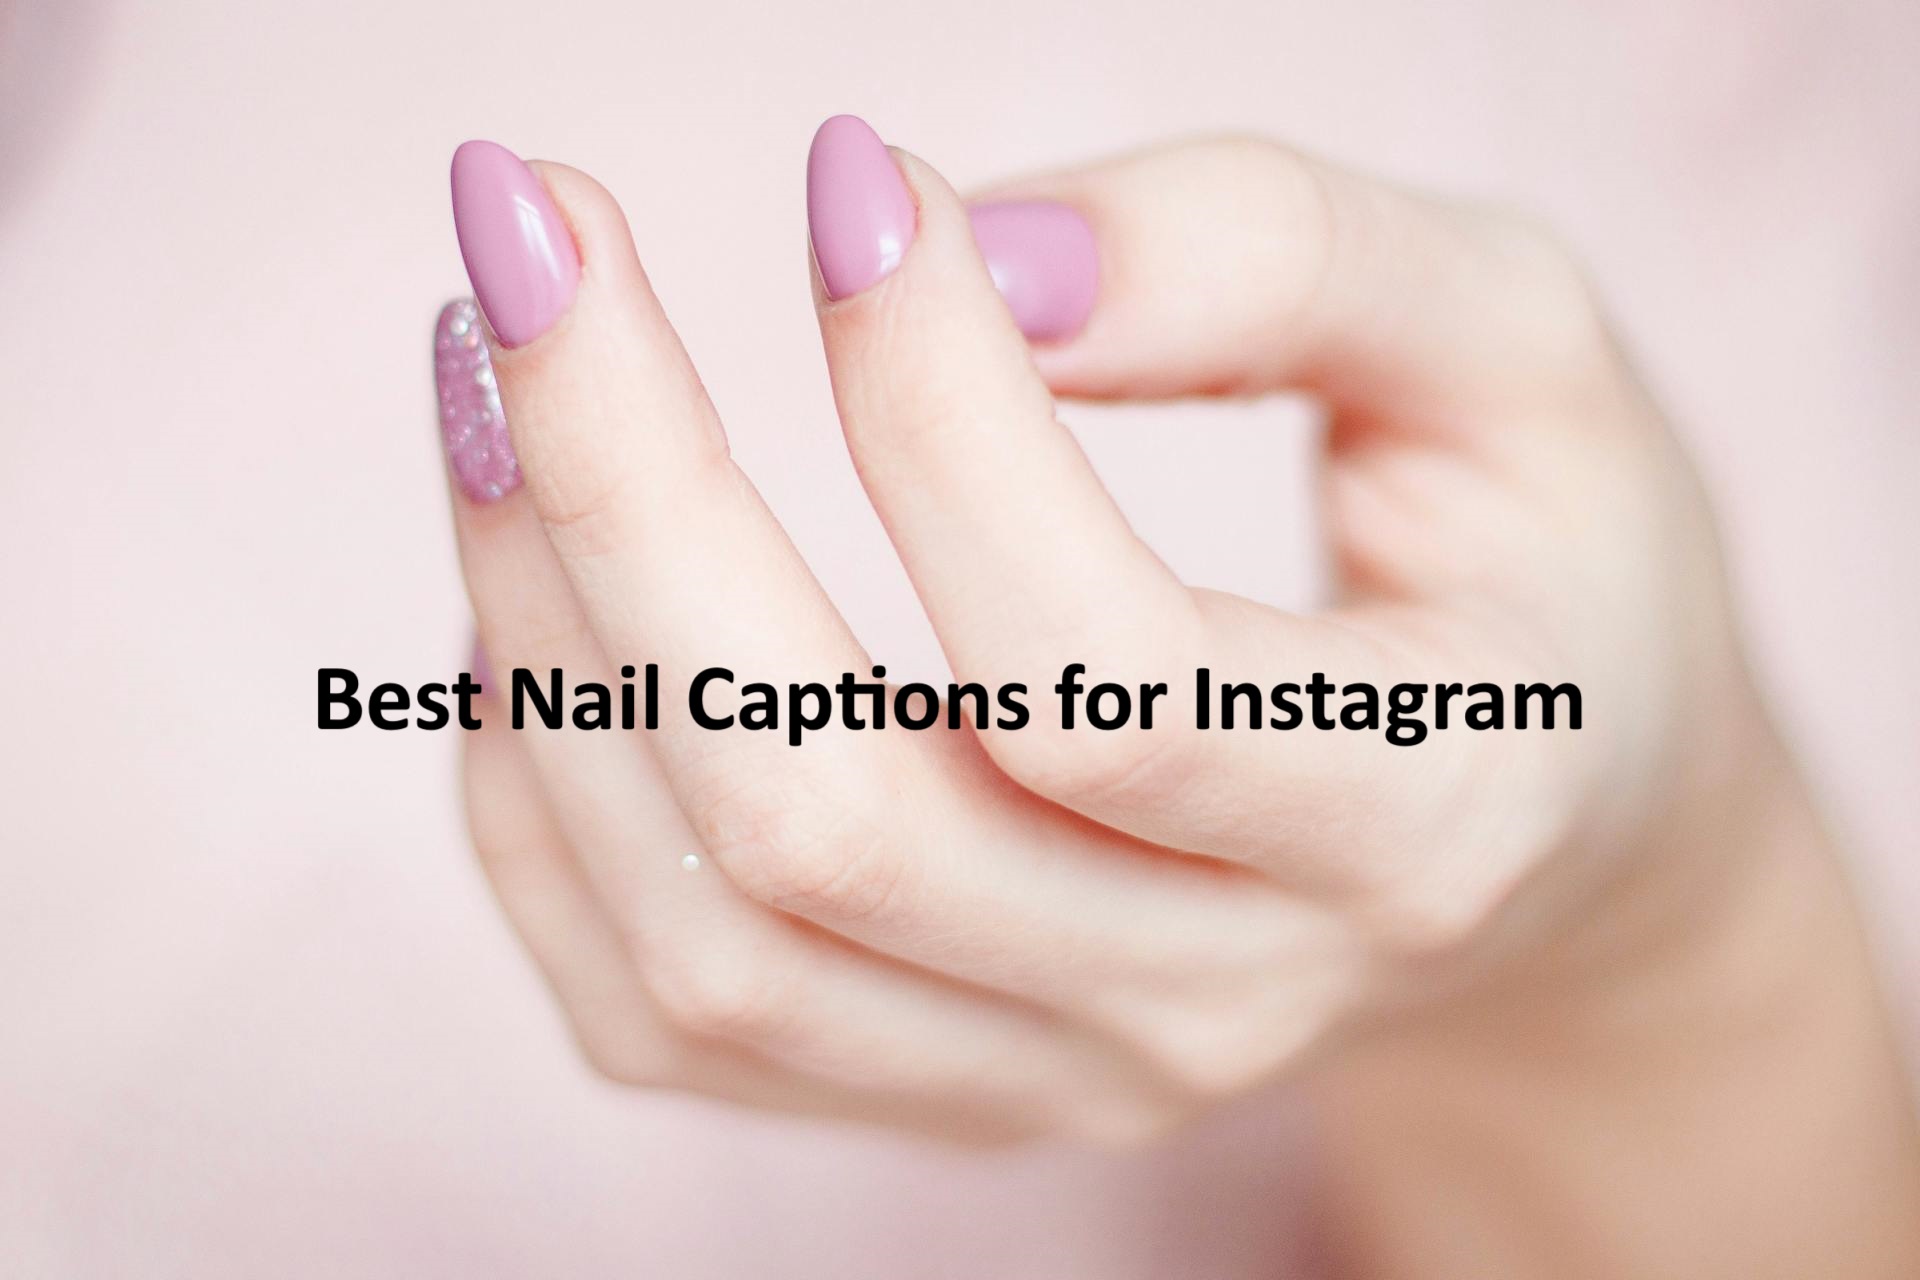 Nail Captions for Instagram